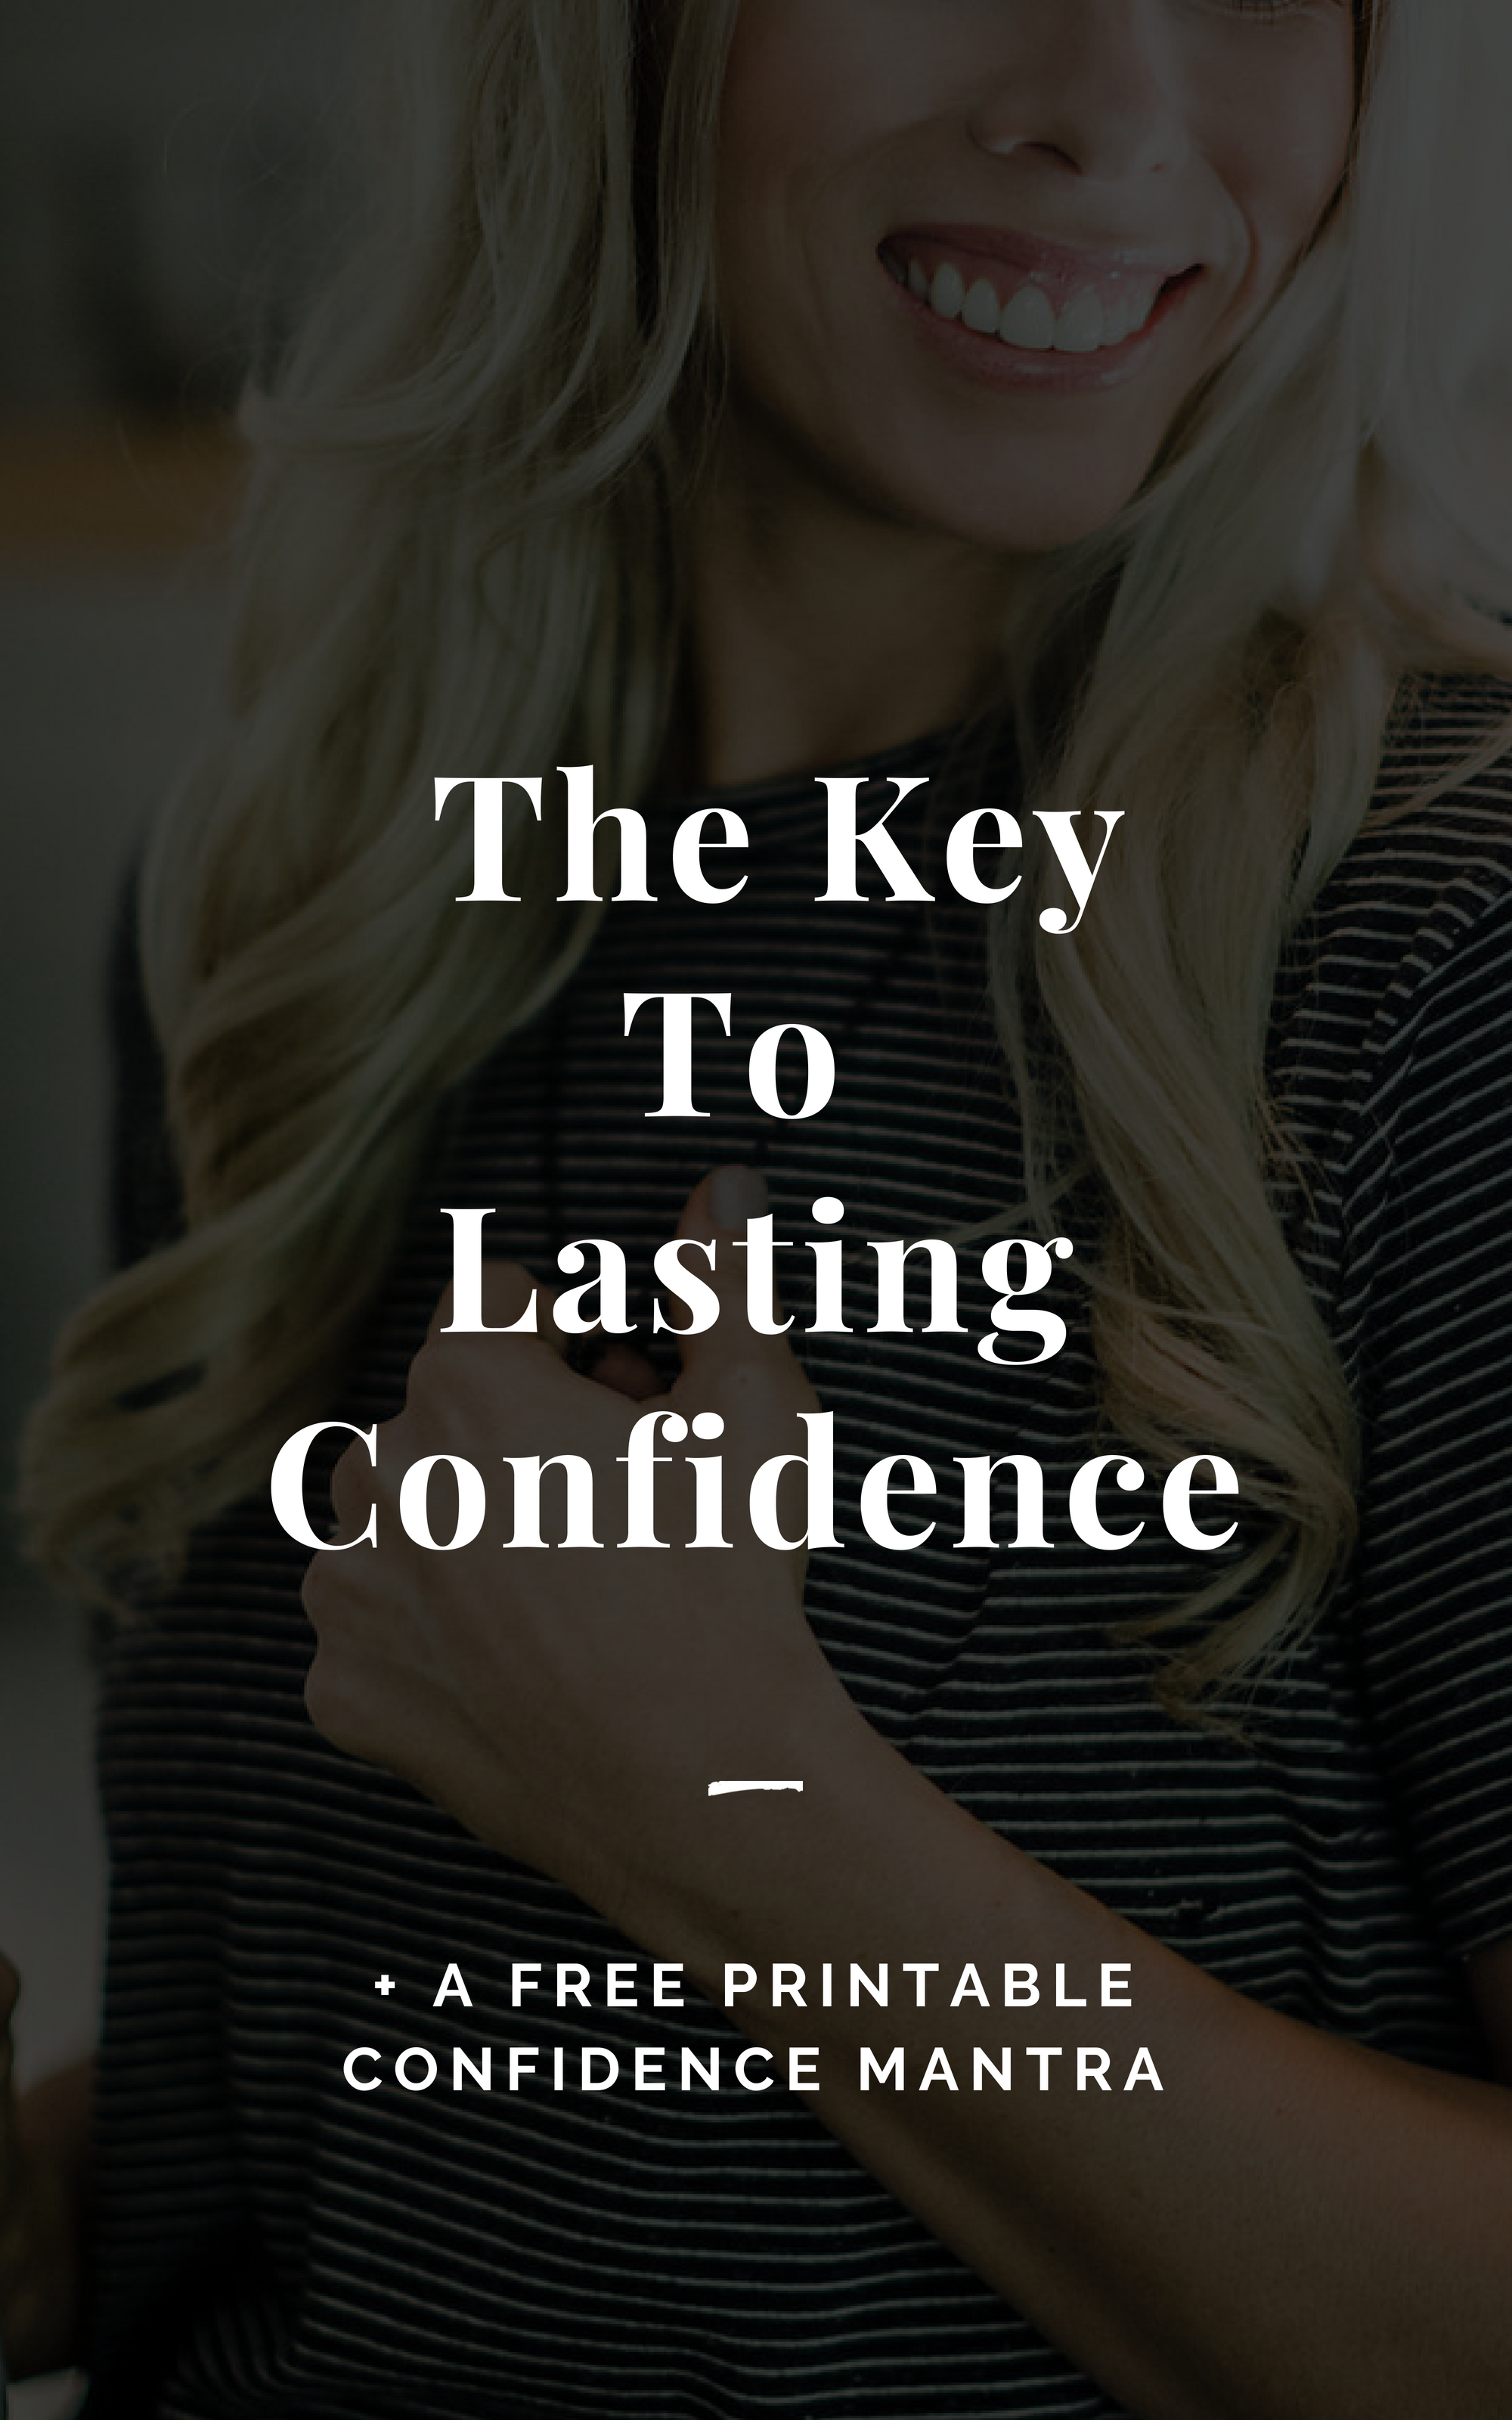 The Key to Lasting Confidence